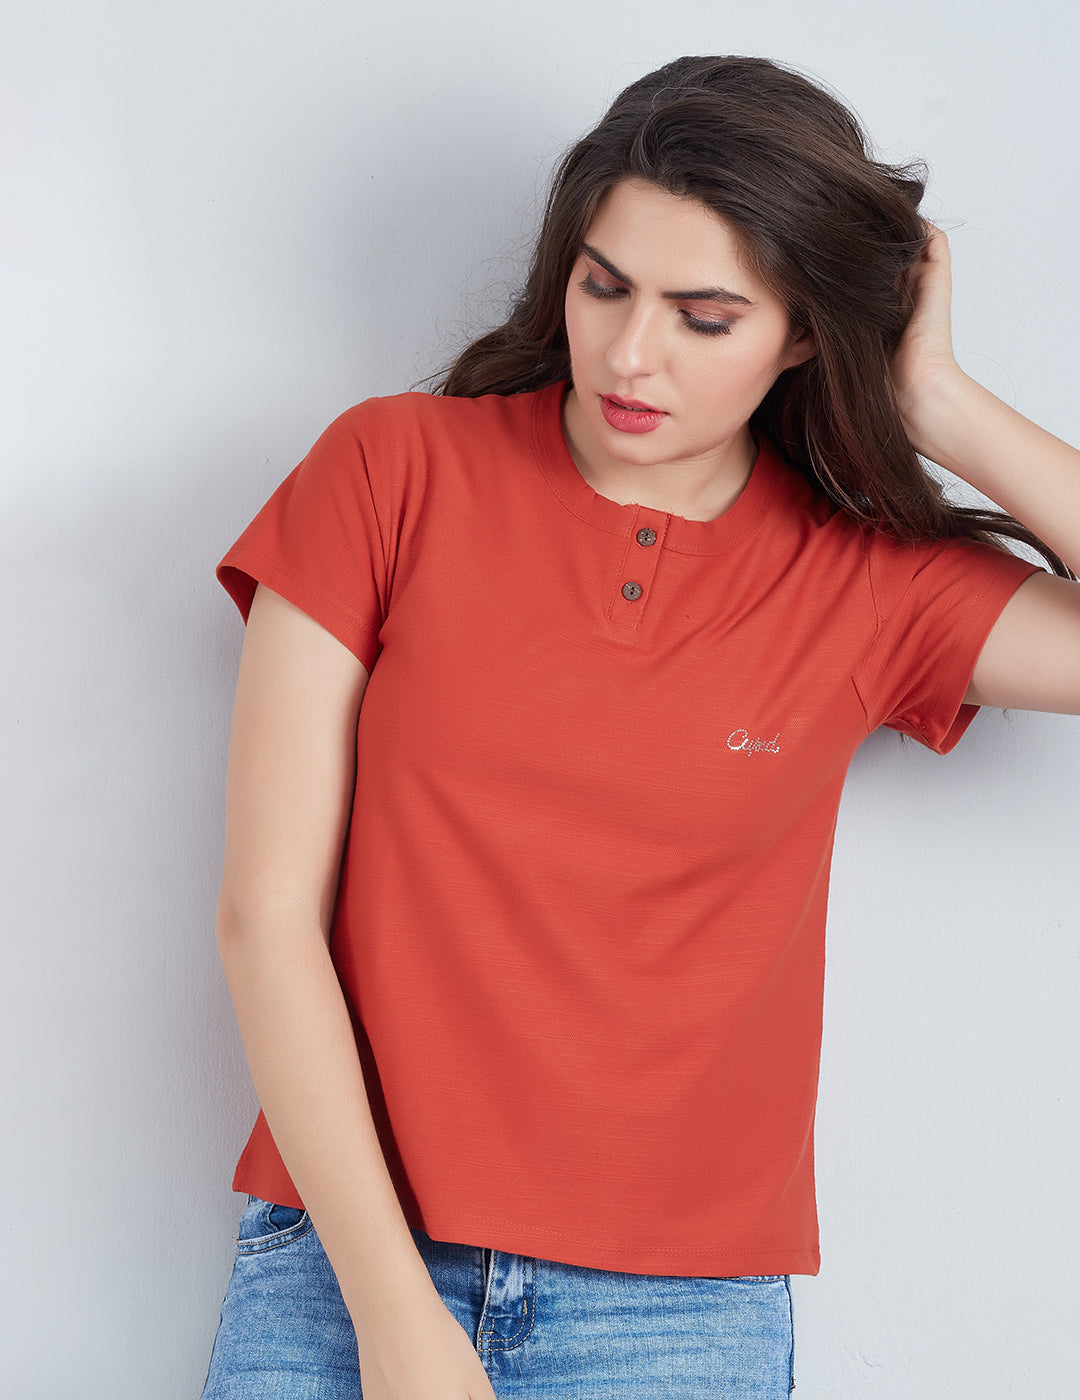 Stylish Rust Plain Cotton Short T-shirts For Women Online In India